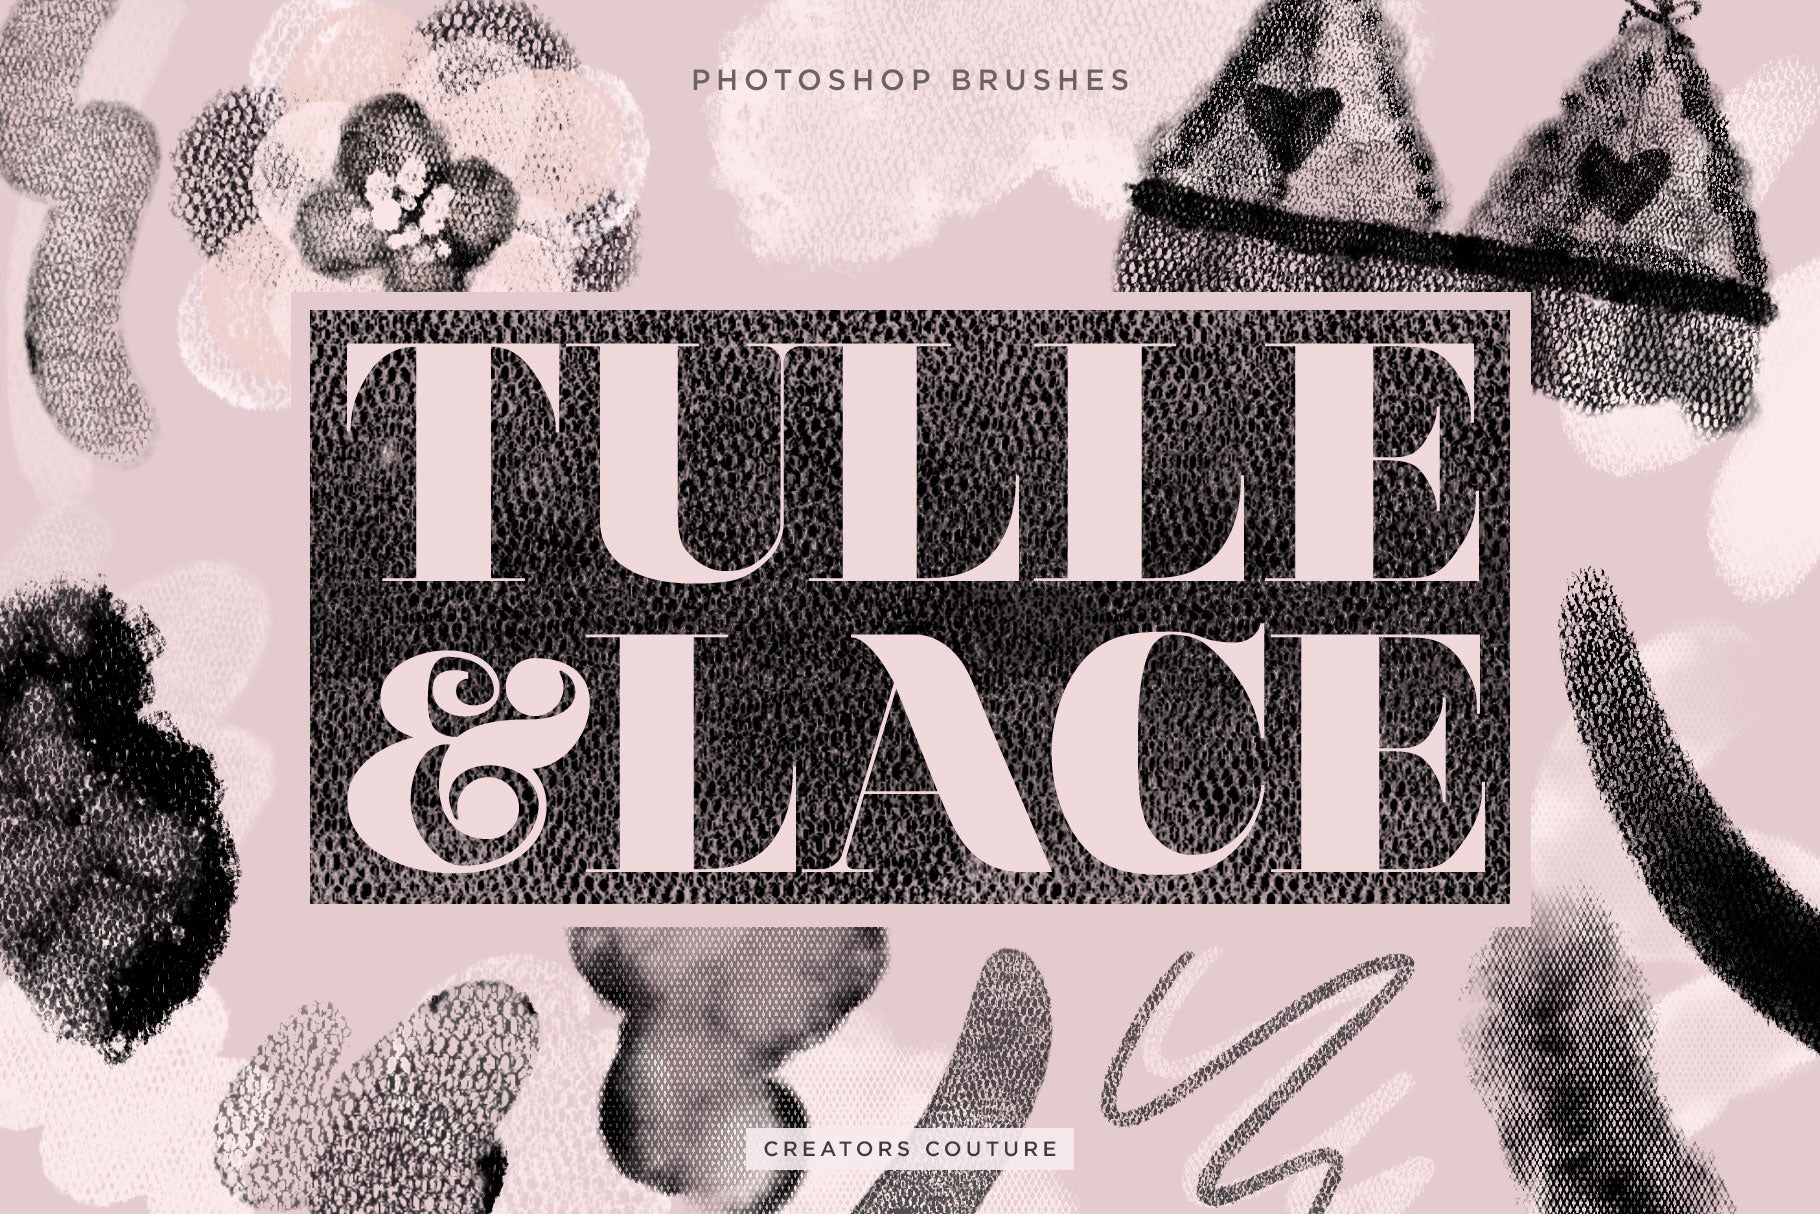 Artistic Tulle and Lace Fashion Inspired Photoshop Brushes Cover image